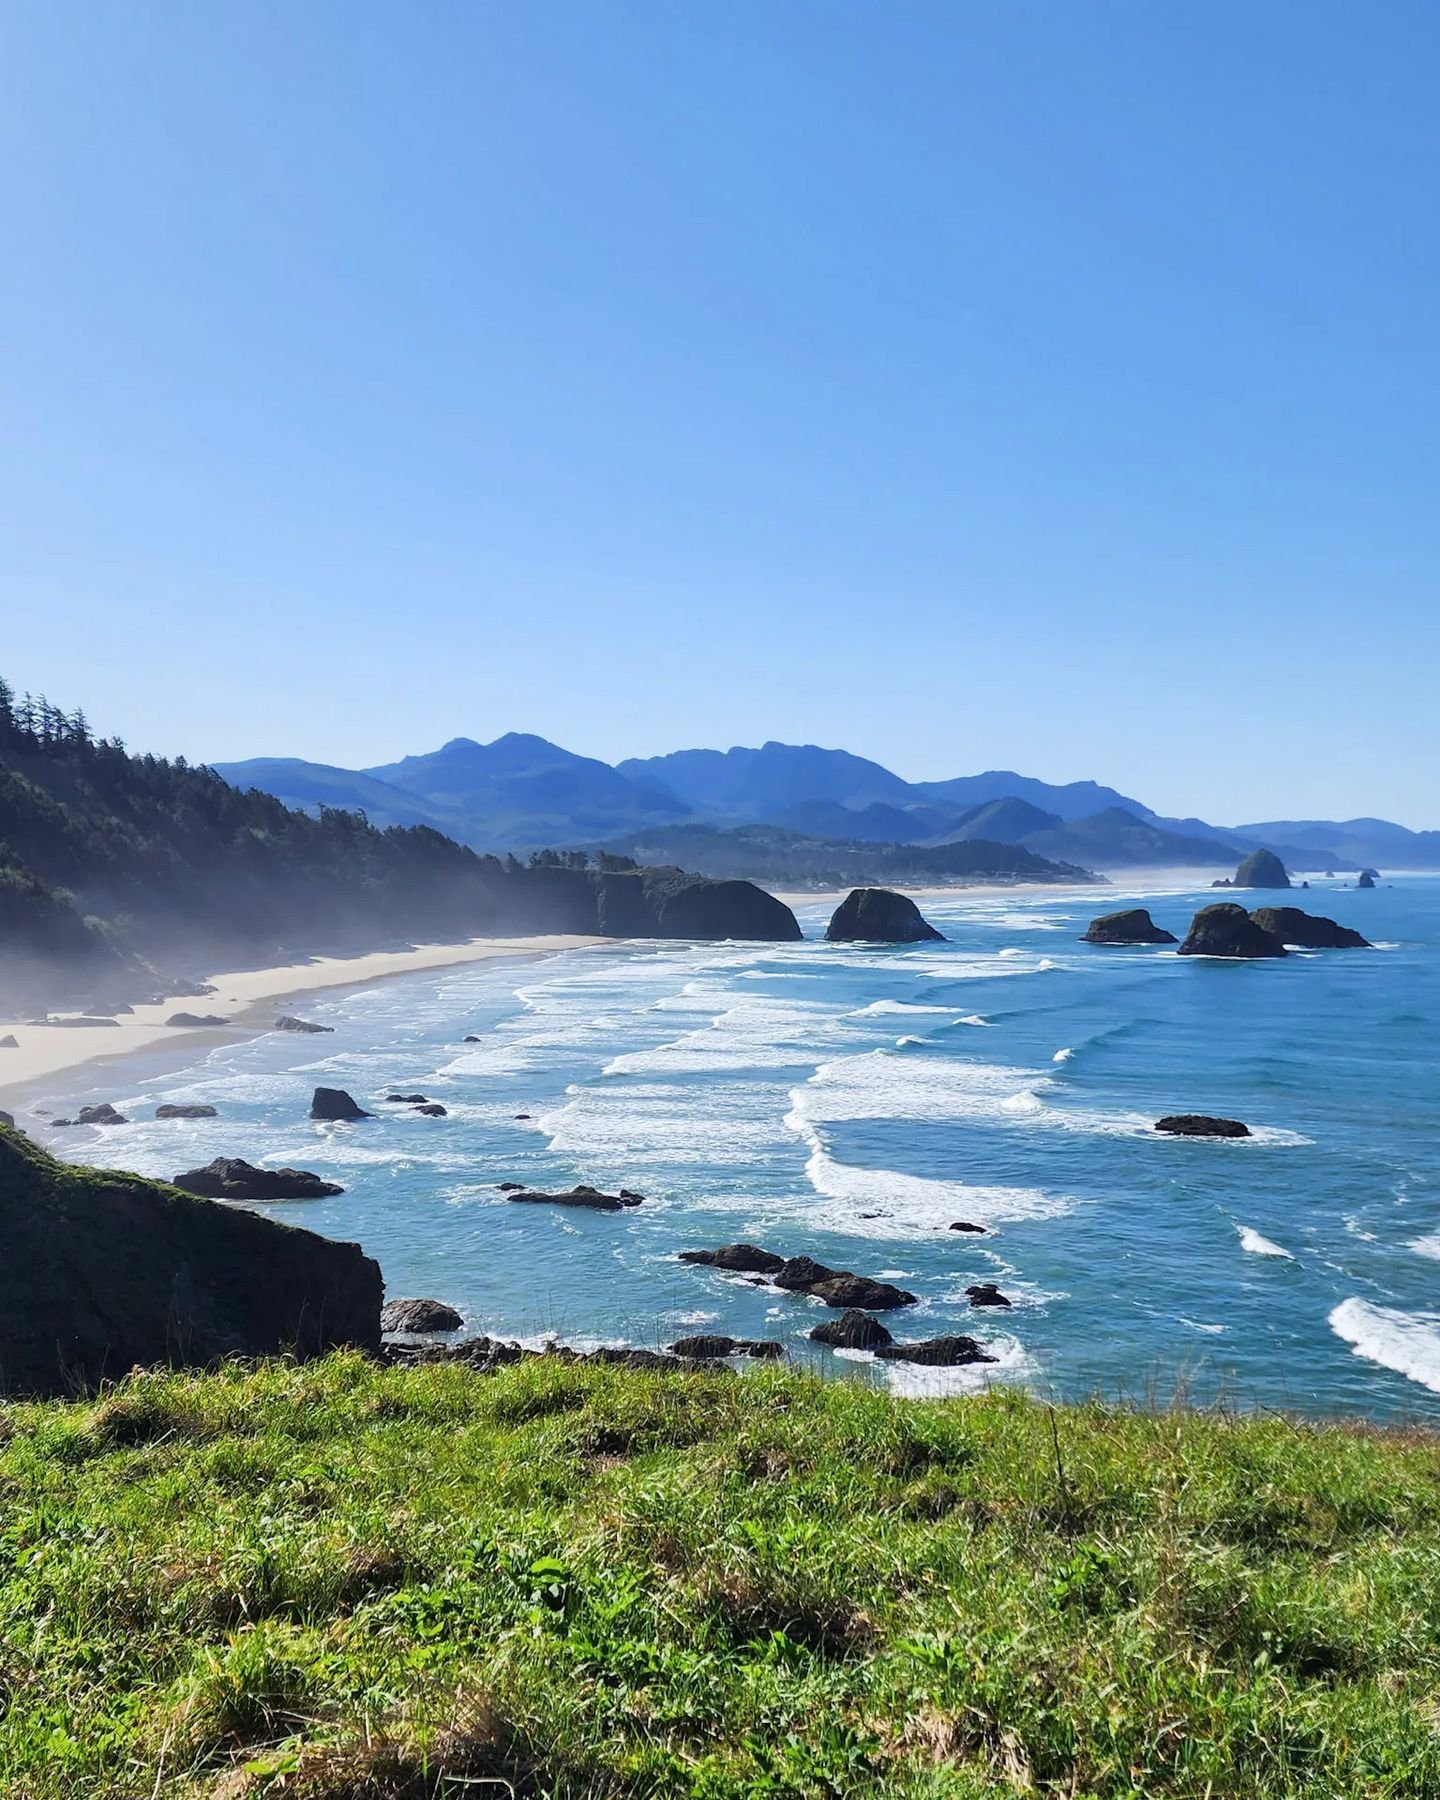 Ever wish you could step into a postcard? Welcome to Ecola State Park! 💌 
 
With every turn, a picture-perfect scene pops up to remind you why the Oregon coast is the voyage of a lifetime. Who else has been spellbound by this place? 
 
Last year, I 